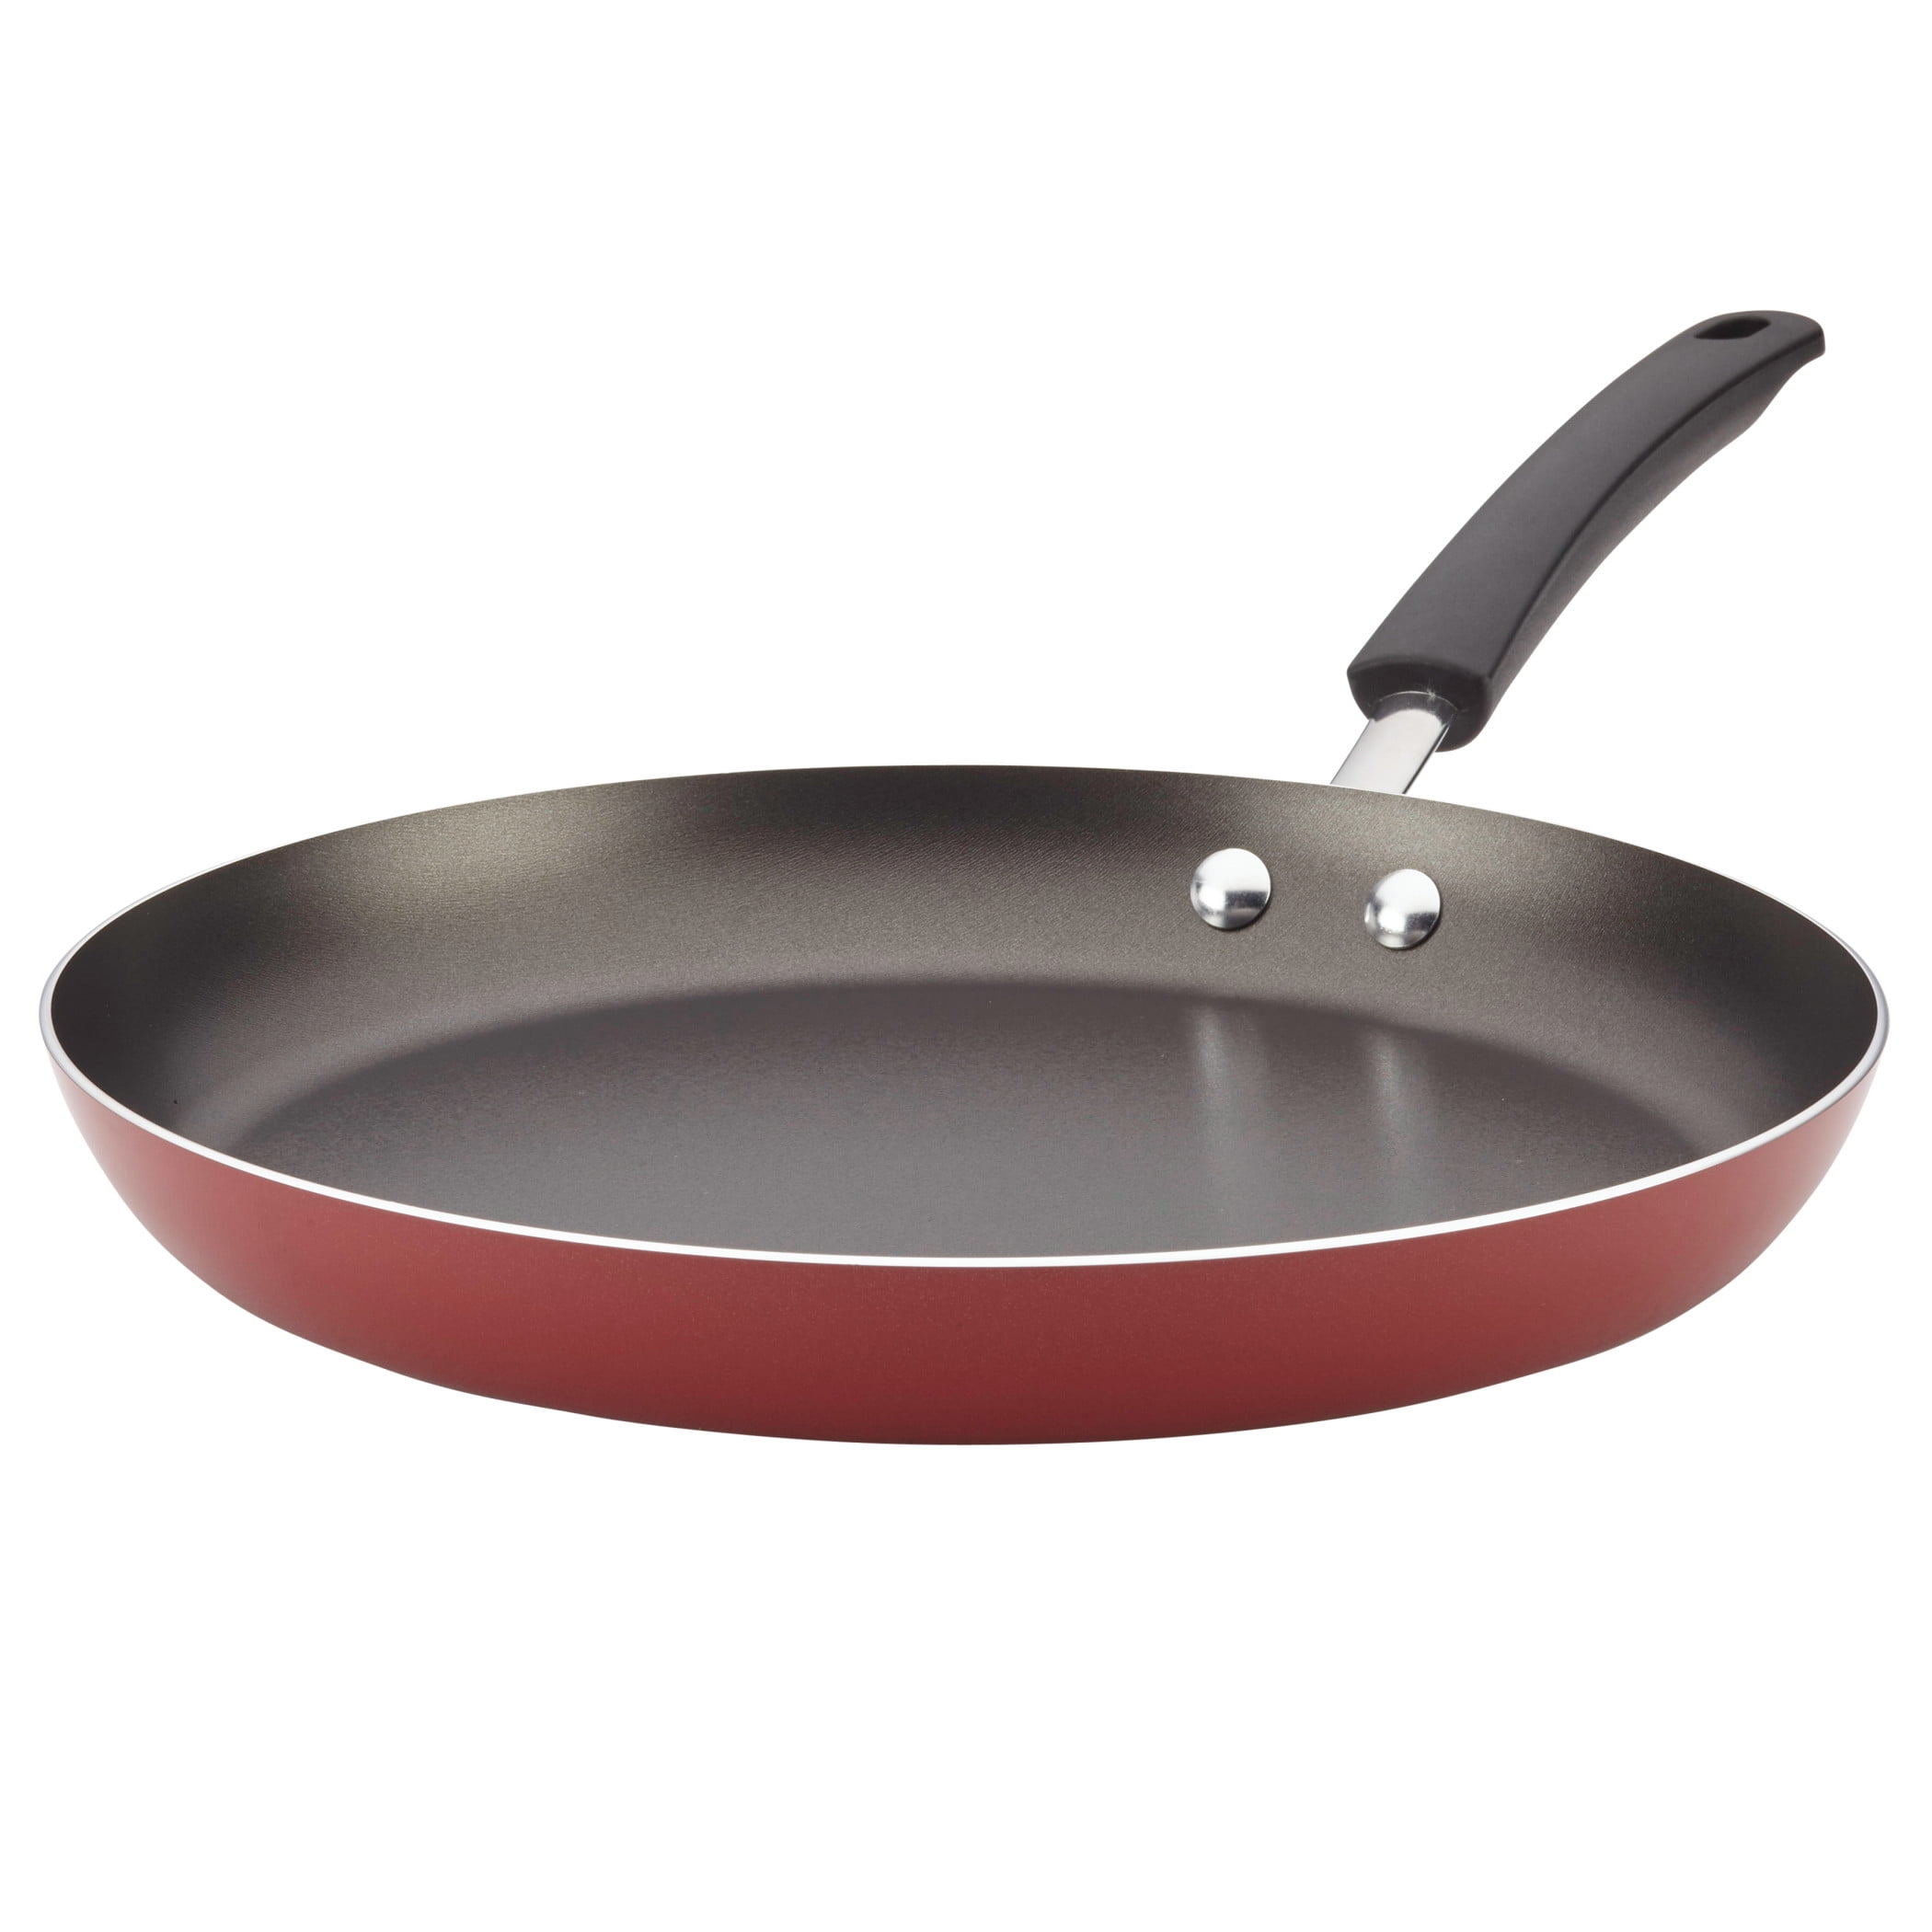 Skillet Fry Pan | Hot Sex Picture